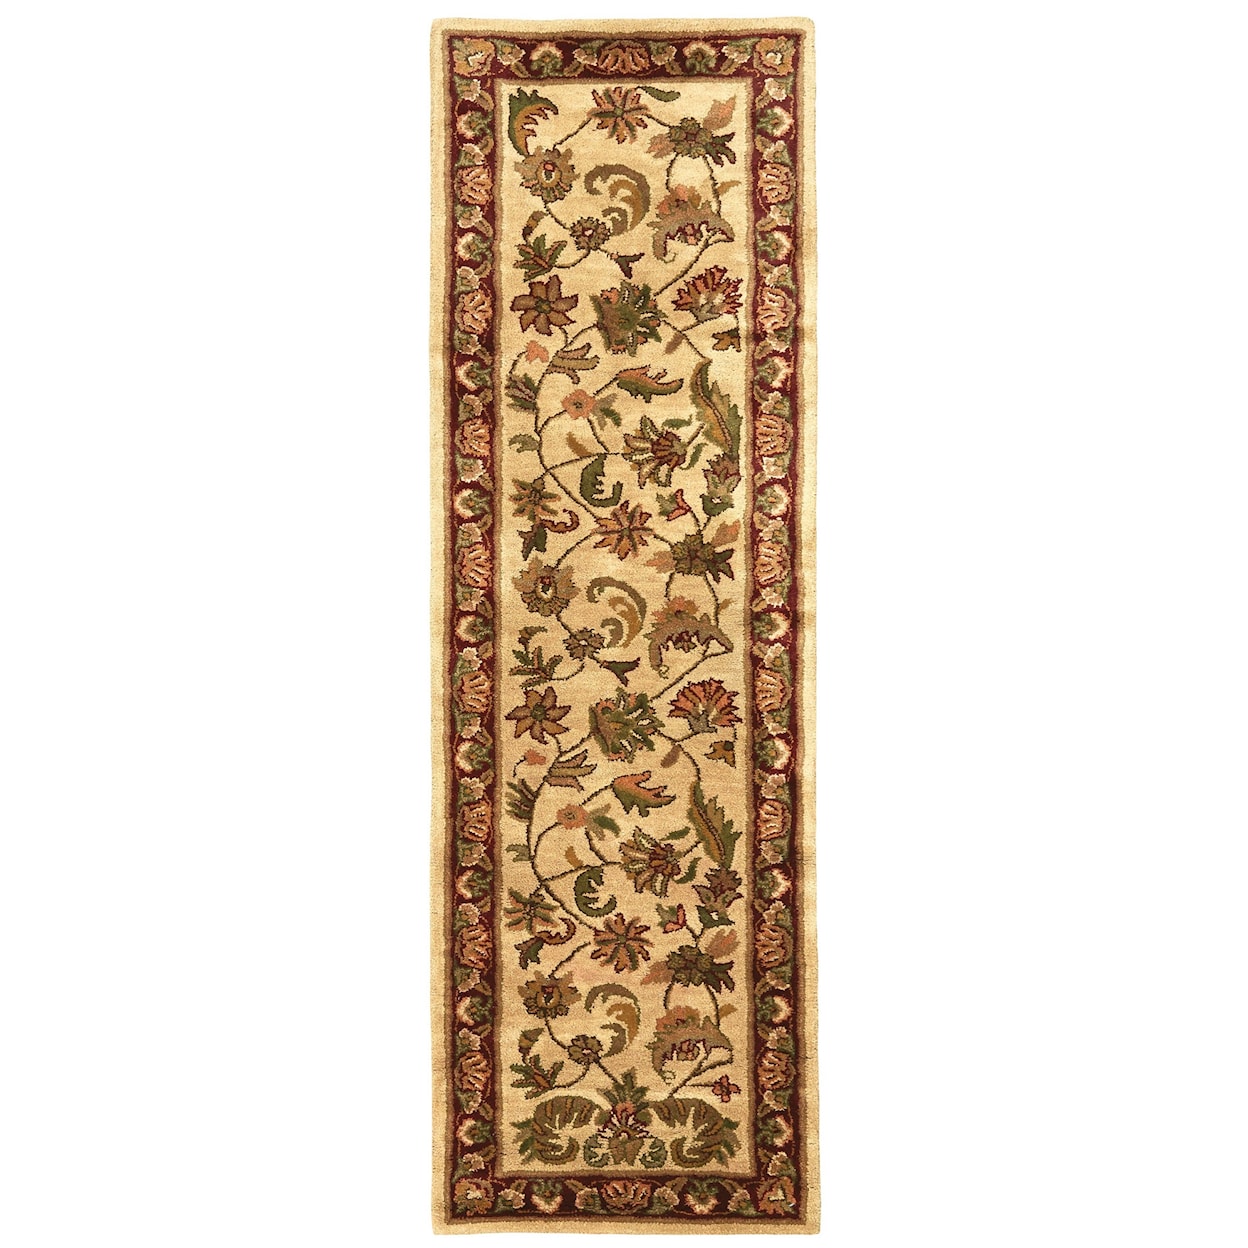 Feizy Rugs Yale Ivory/Red 2' x 3' Area Rug